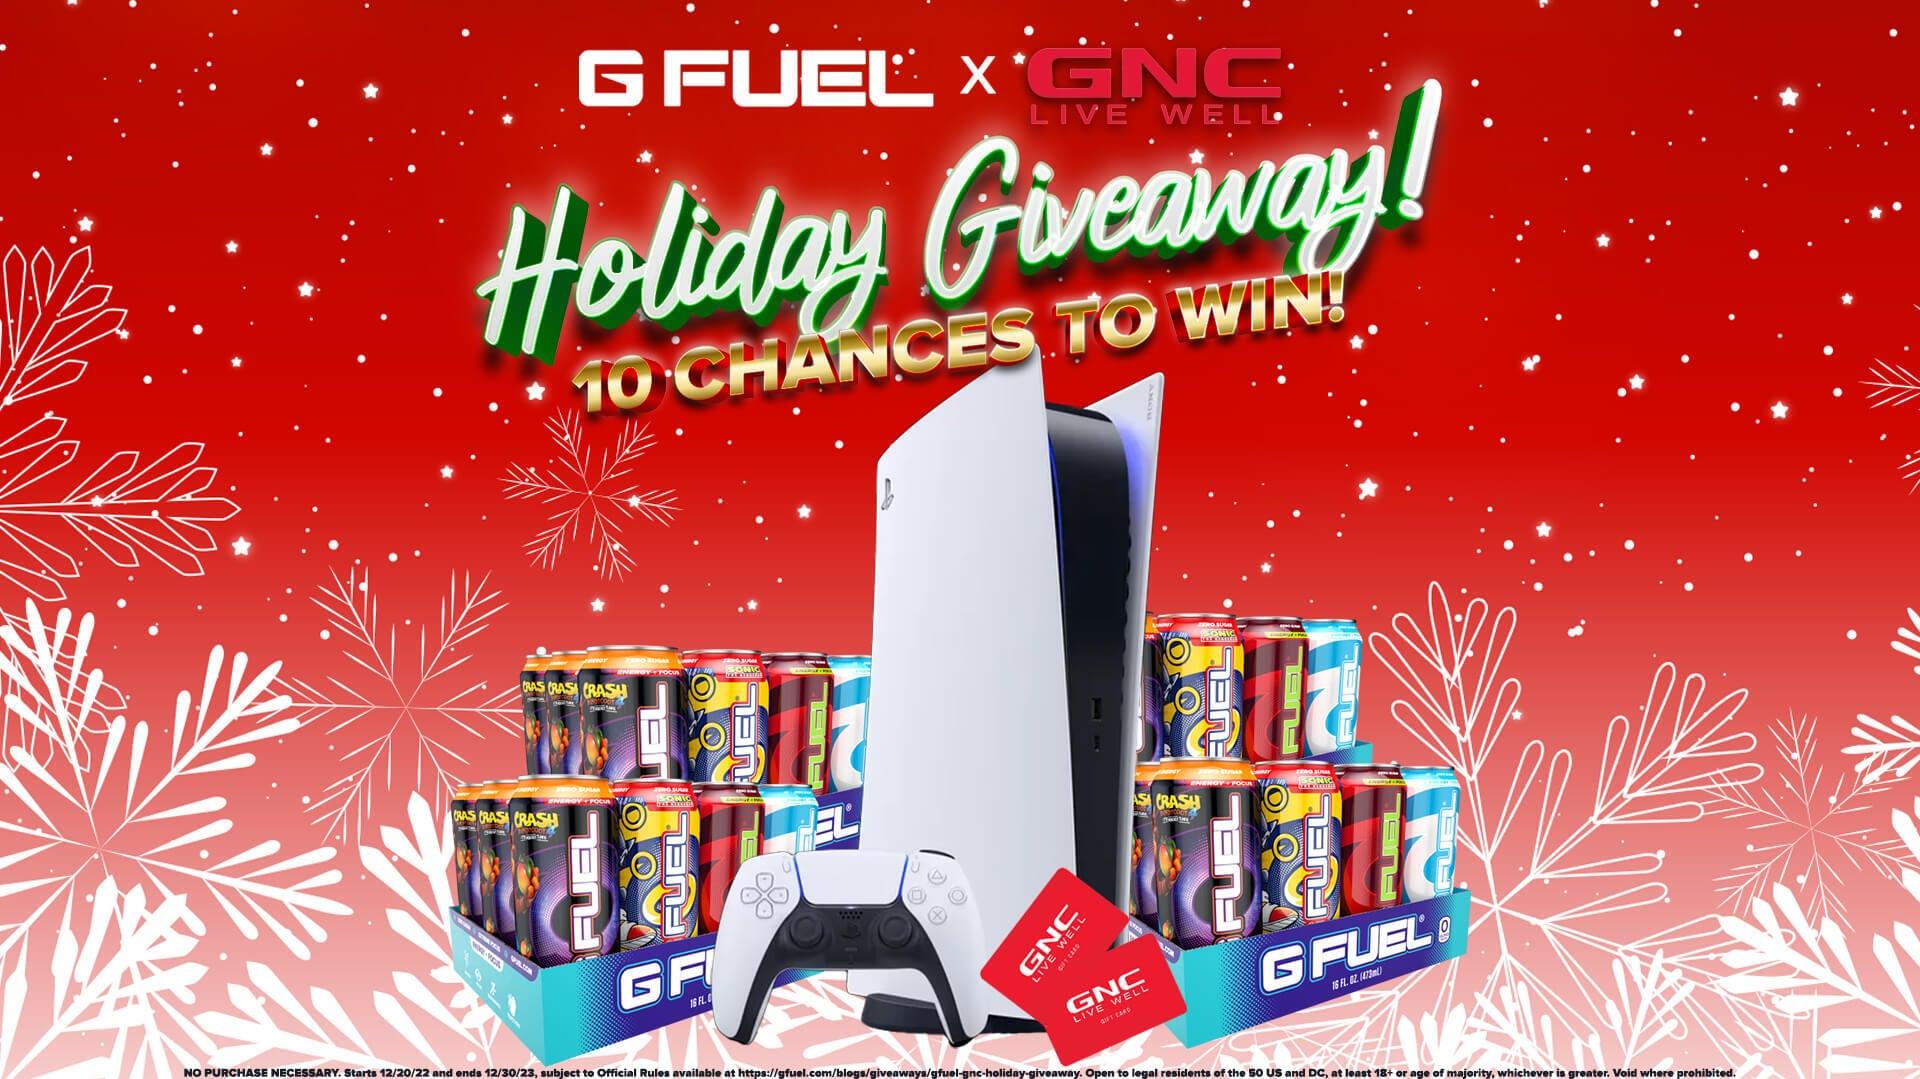 G Fuel X Gnc Holiday Giveaway